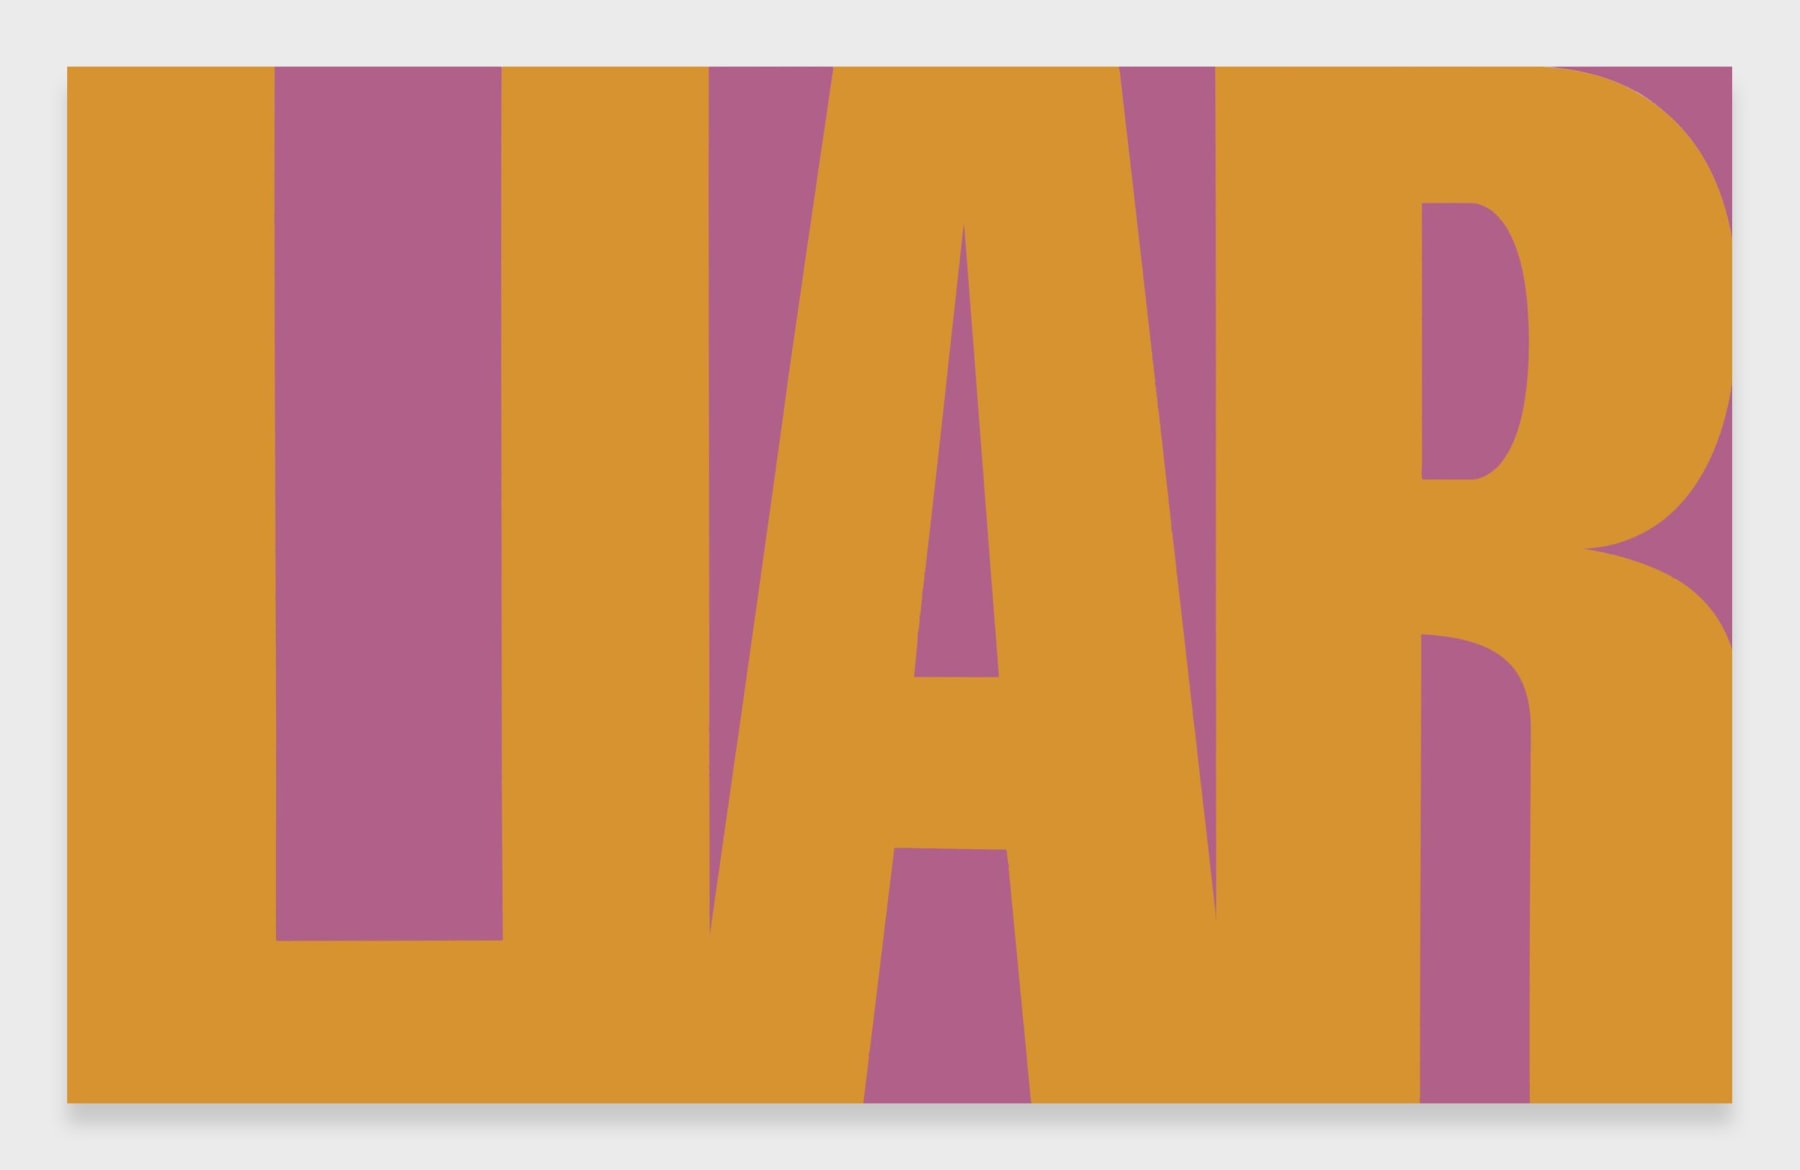 Liar, 1995, Household gloss paint on canvas, 60 x 96 inches